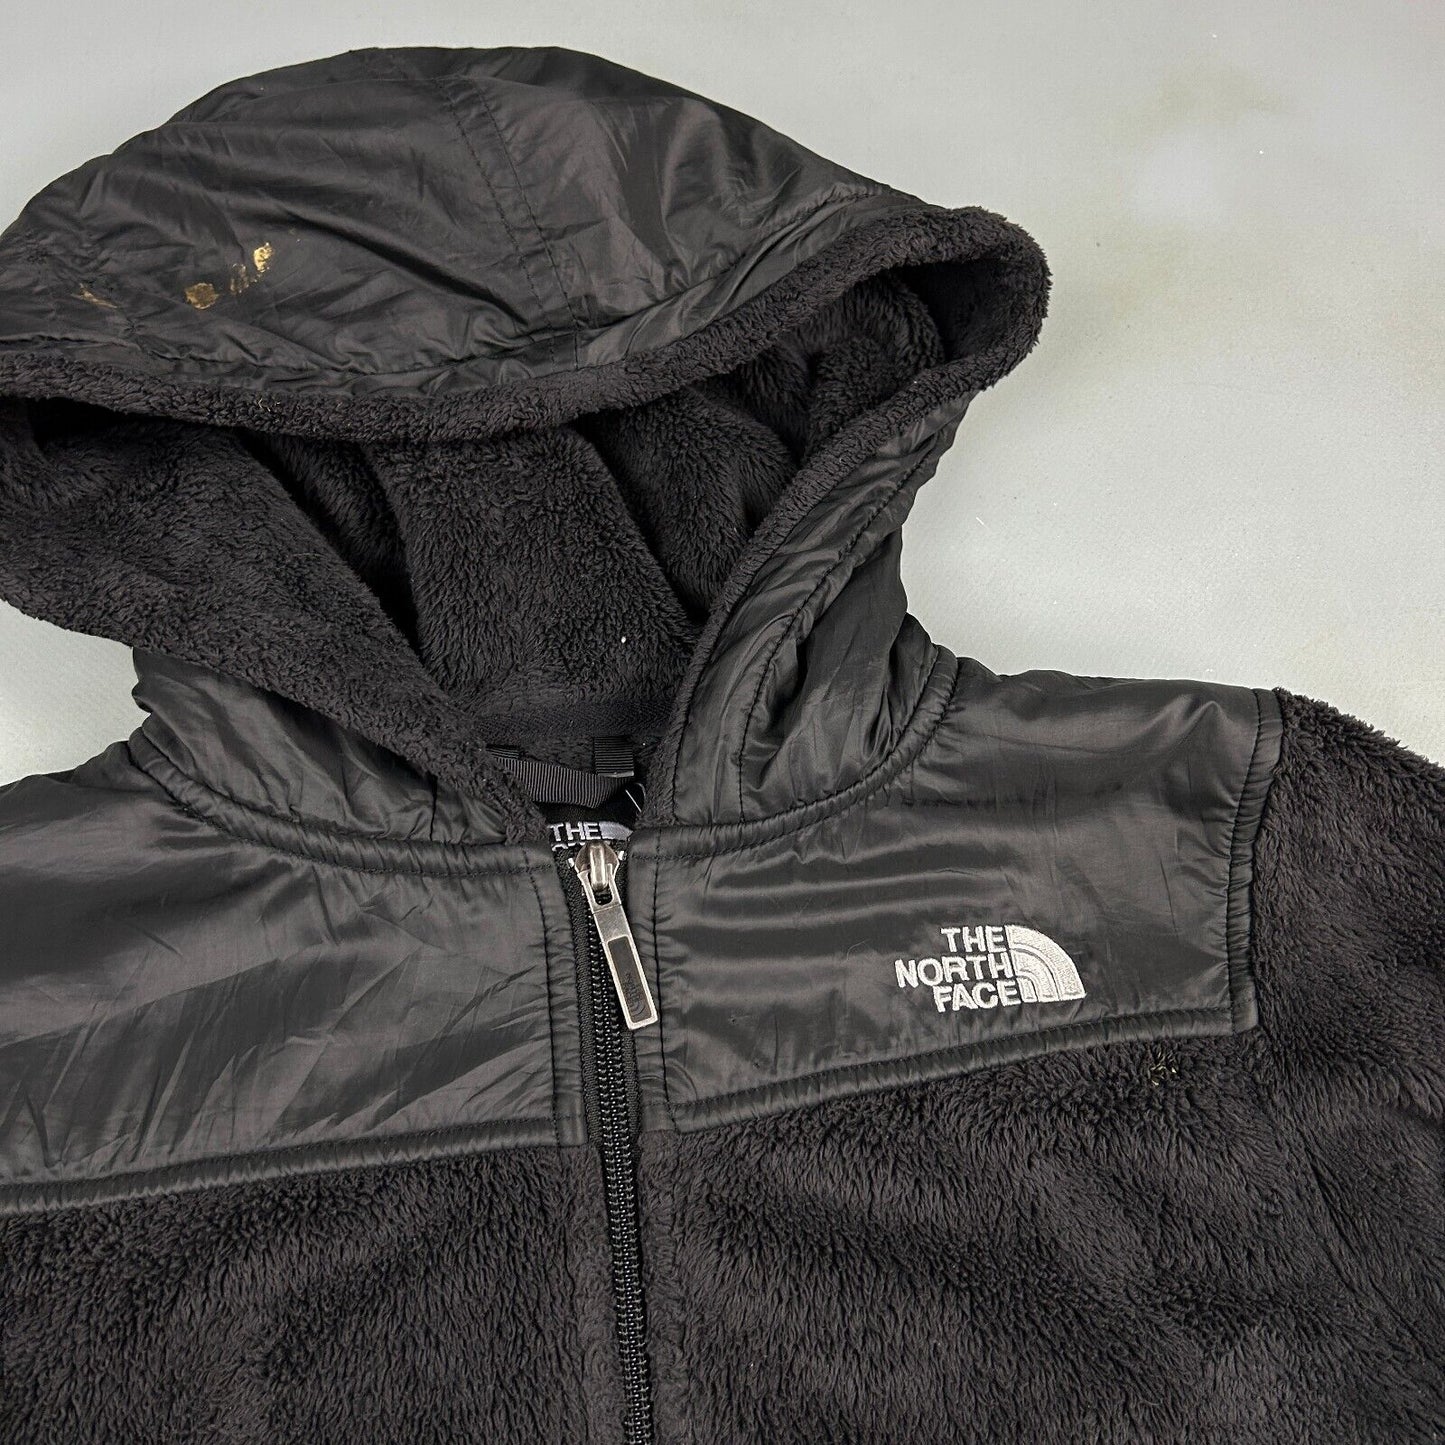 VINTAGE The North Face Black Hooded Fleece Sweater sz XS Womens Adult